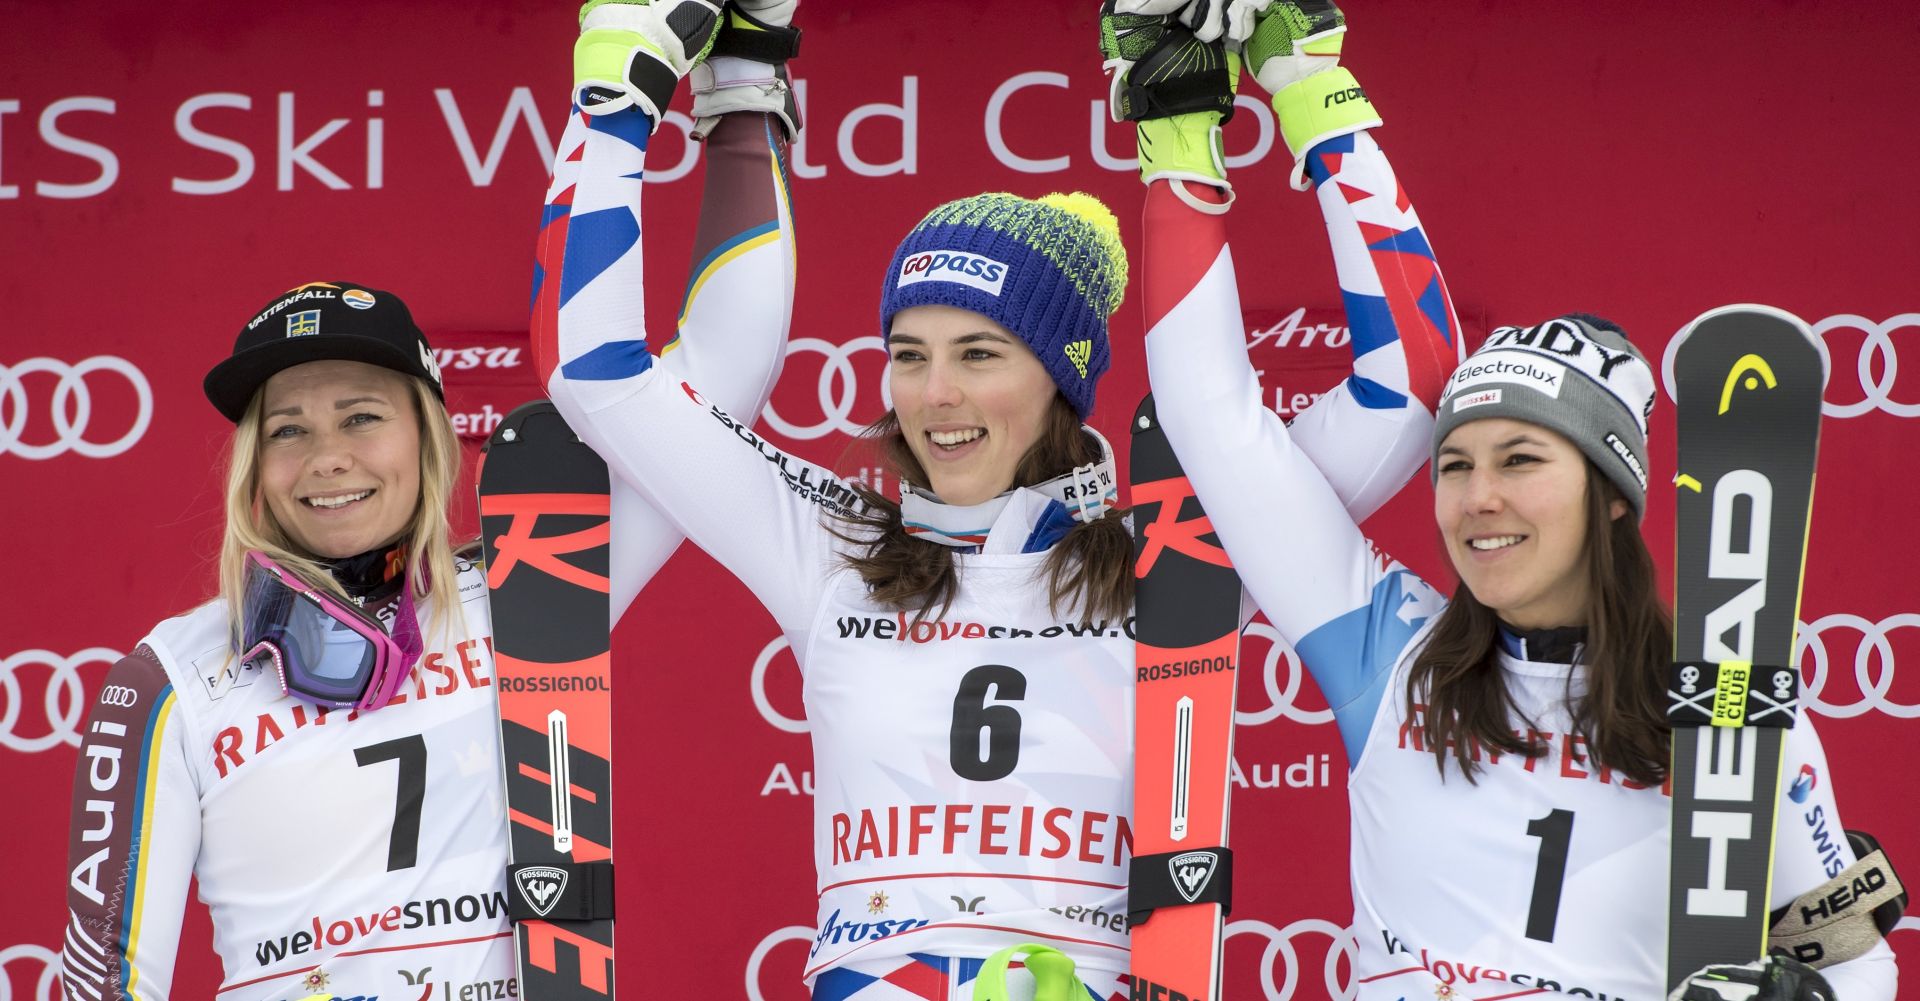 epa06481095 Winner Petra Vlhova of Slovakia (C) poses with second placed Frida Hansdotter (L) of Sweden and third placed Wendy Holdener of Switzerland celebrate on the podium for the Women's Slalom race at the FIS Alpine Skiing World Cup in Lenzerheide, Switzerland, 28 January 2018.  EPA/JEAN-CHRISTOPHE BOTT